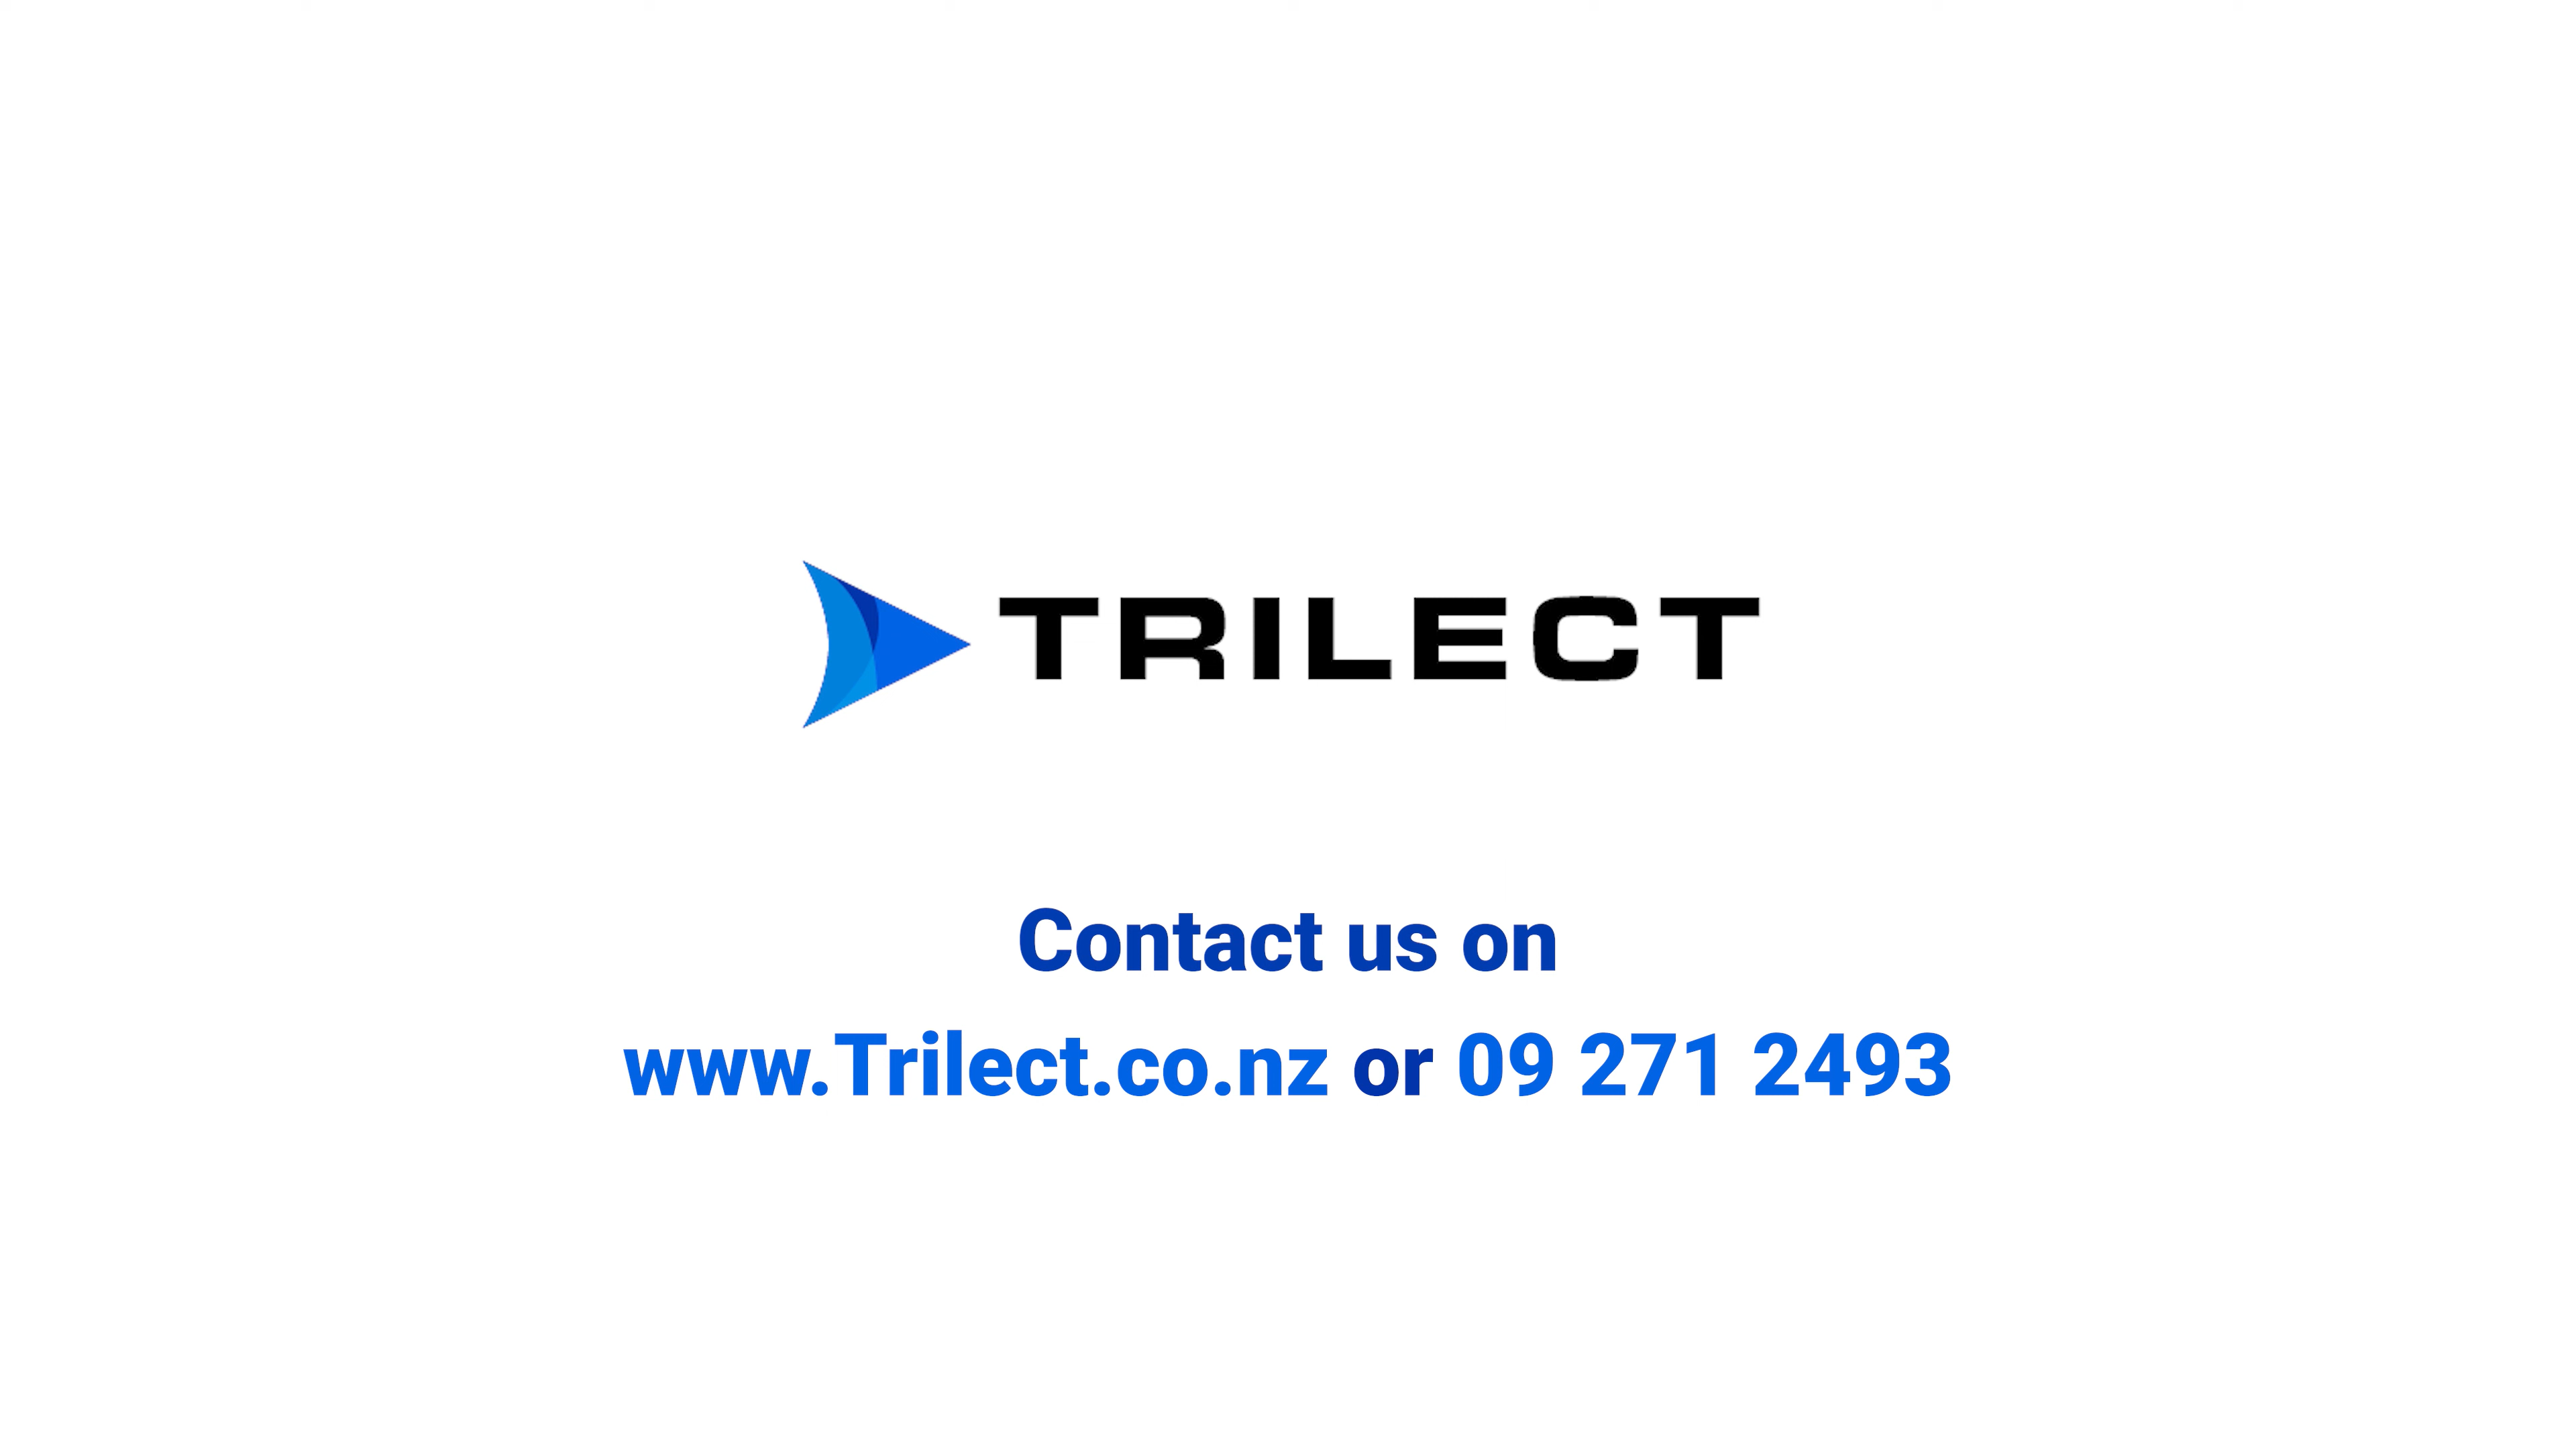 Trilect Whangarei - Master Electrician team | 25+ years of experience | Anything electrical - YouTube